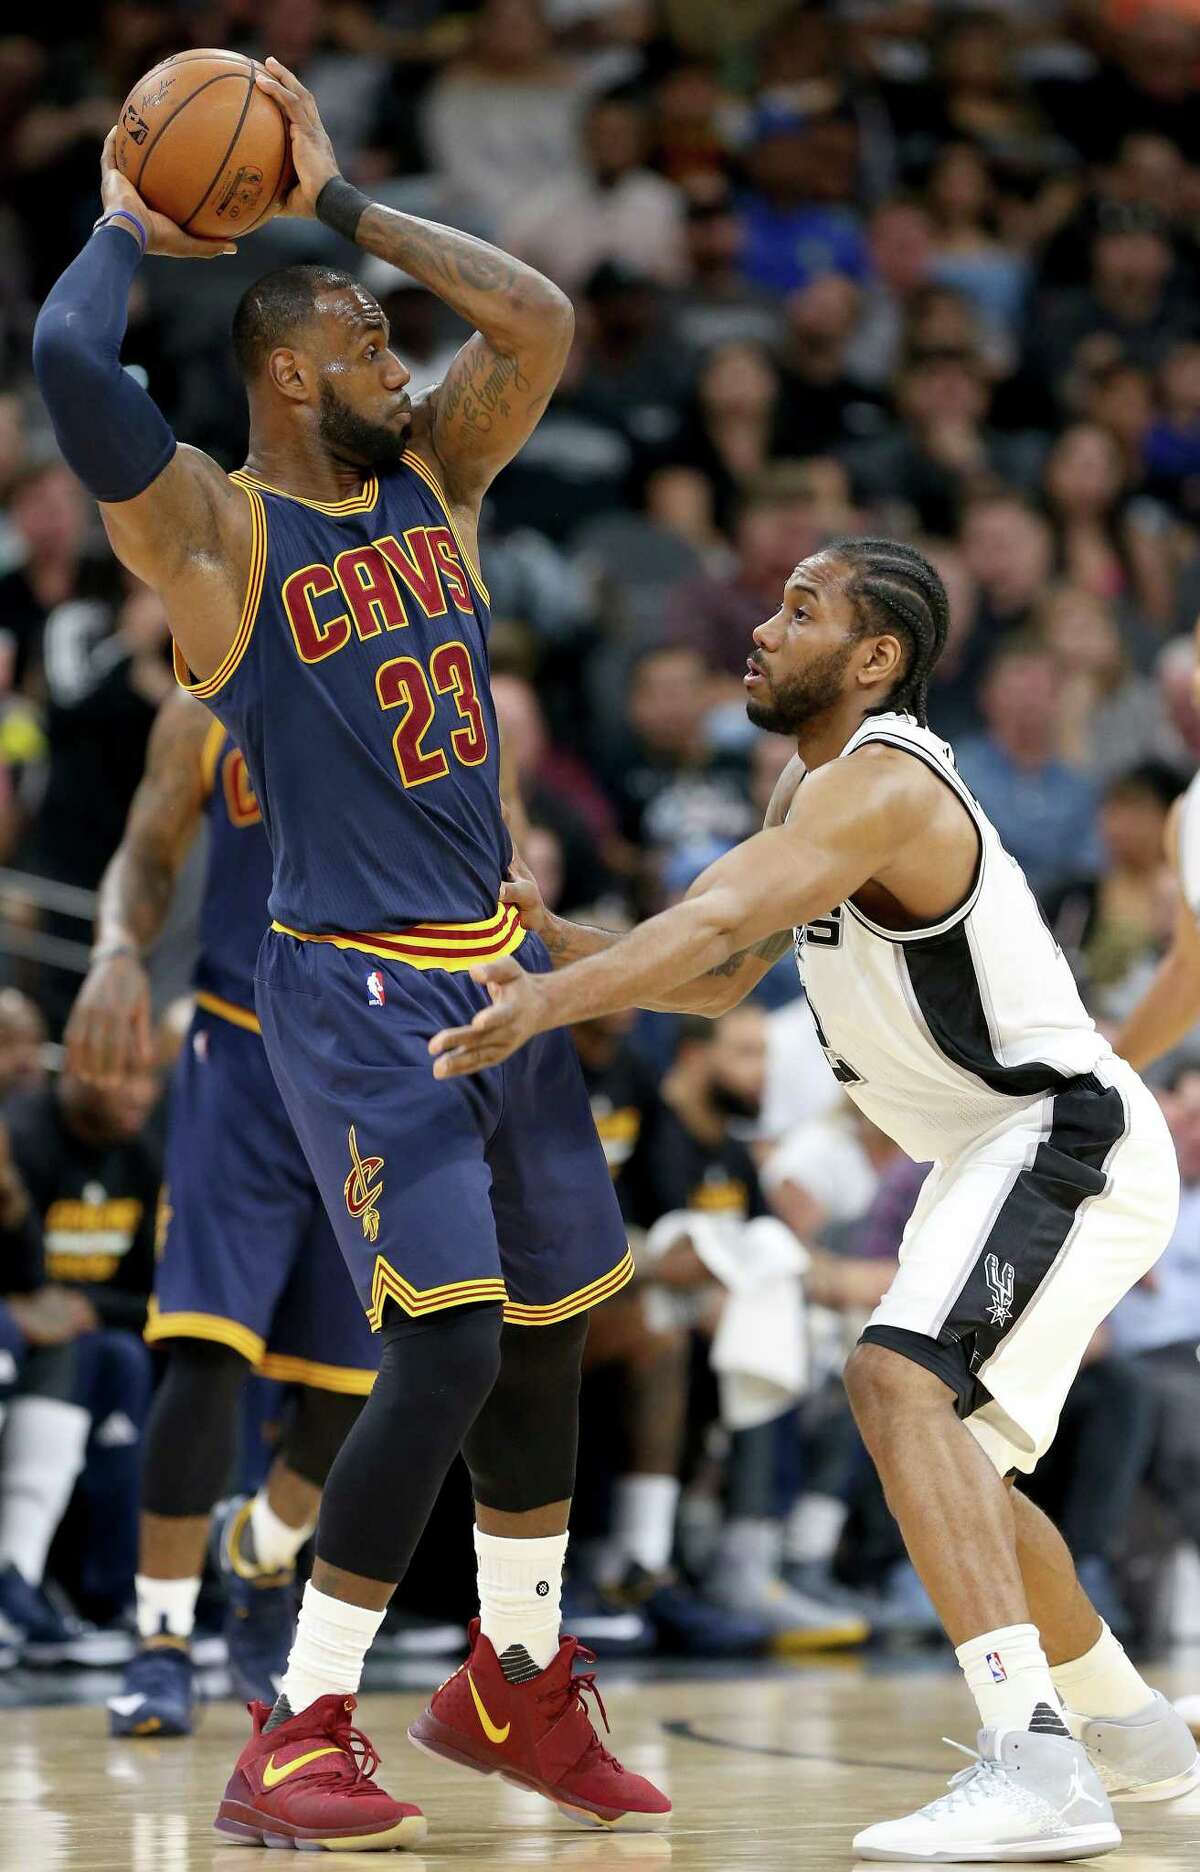 San Antonio Spurs' Kawhi Leonard defends Cleveland Cavaliers' LeBron James during first half action Monday March 27, 2017 at the AT&T Center.